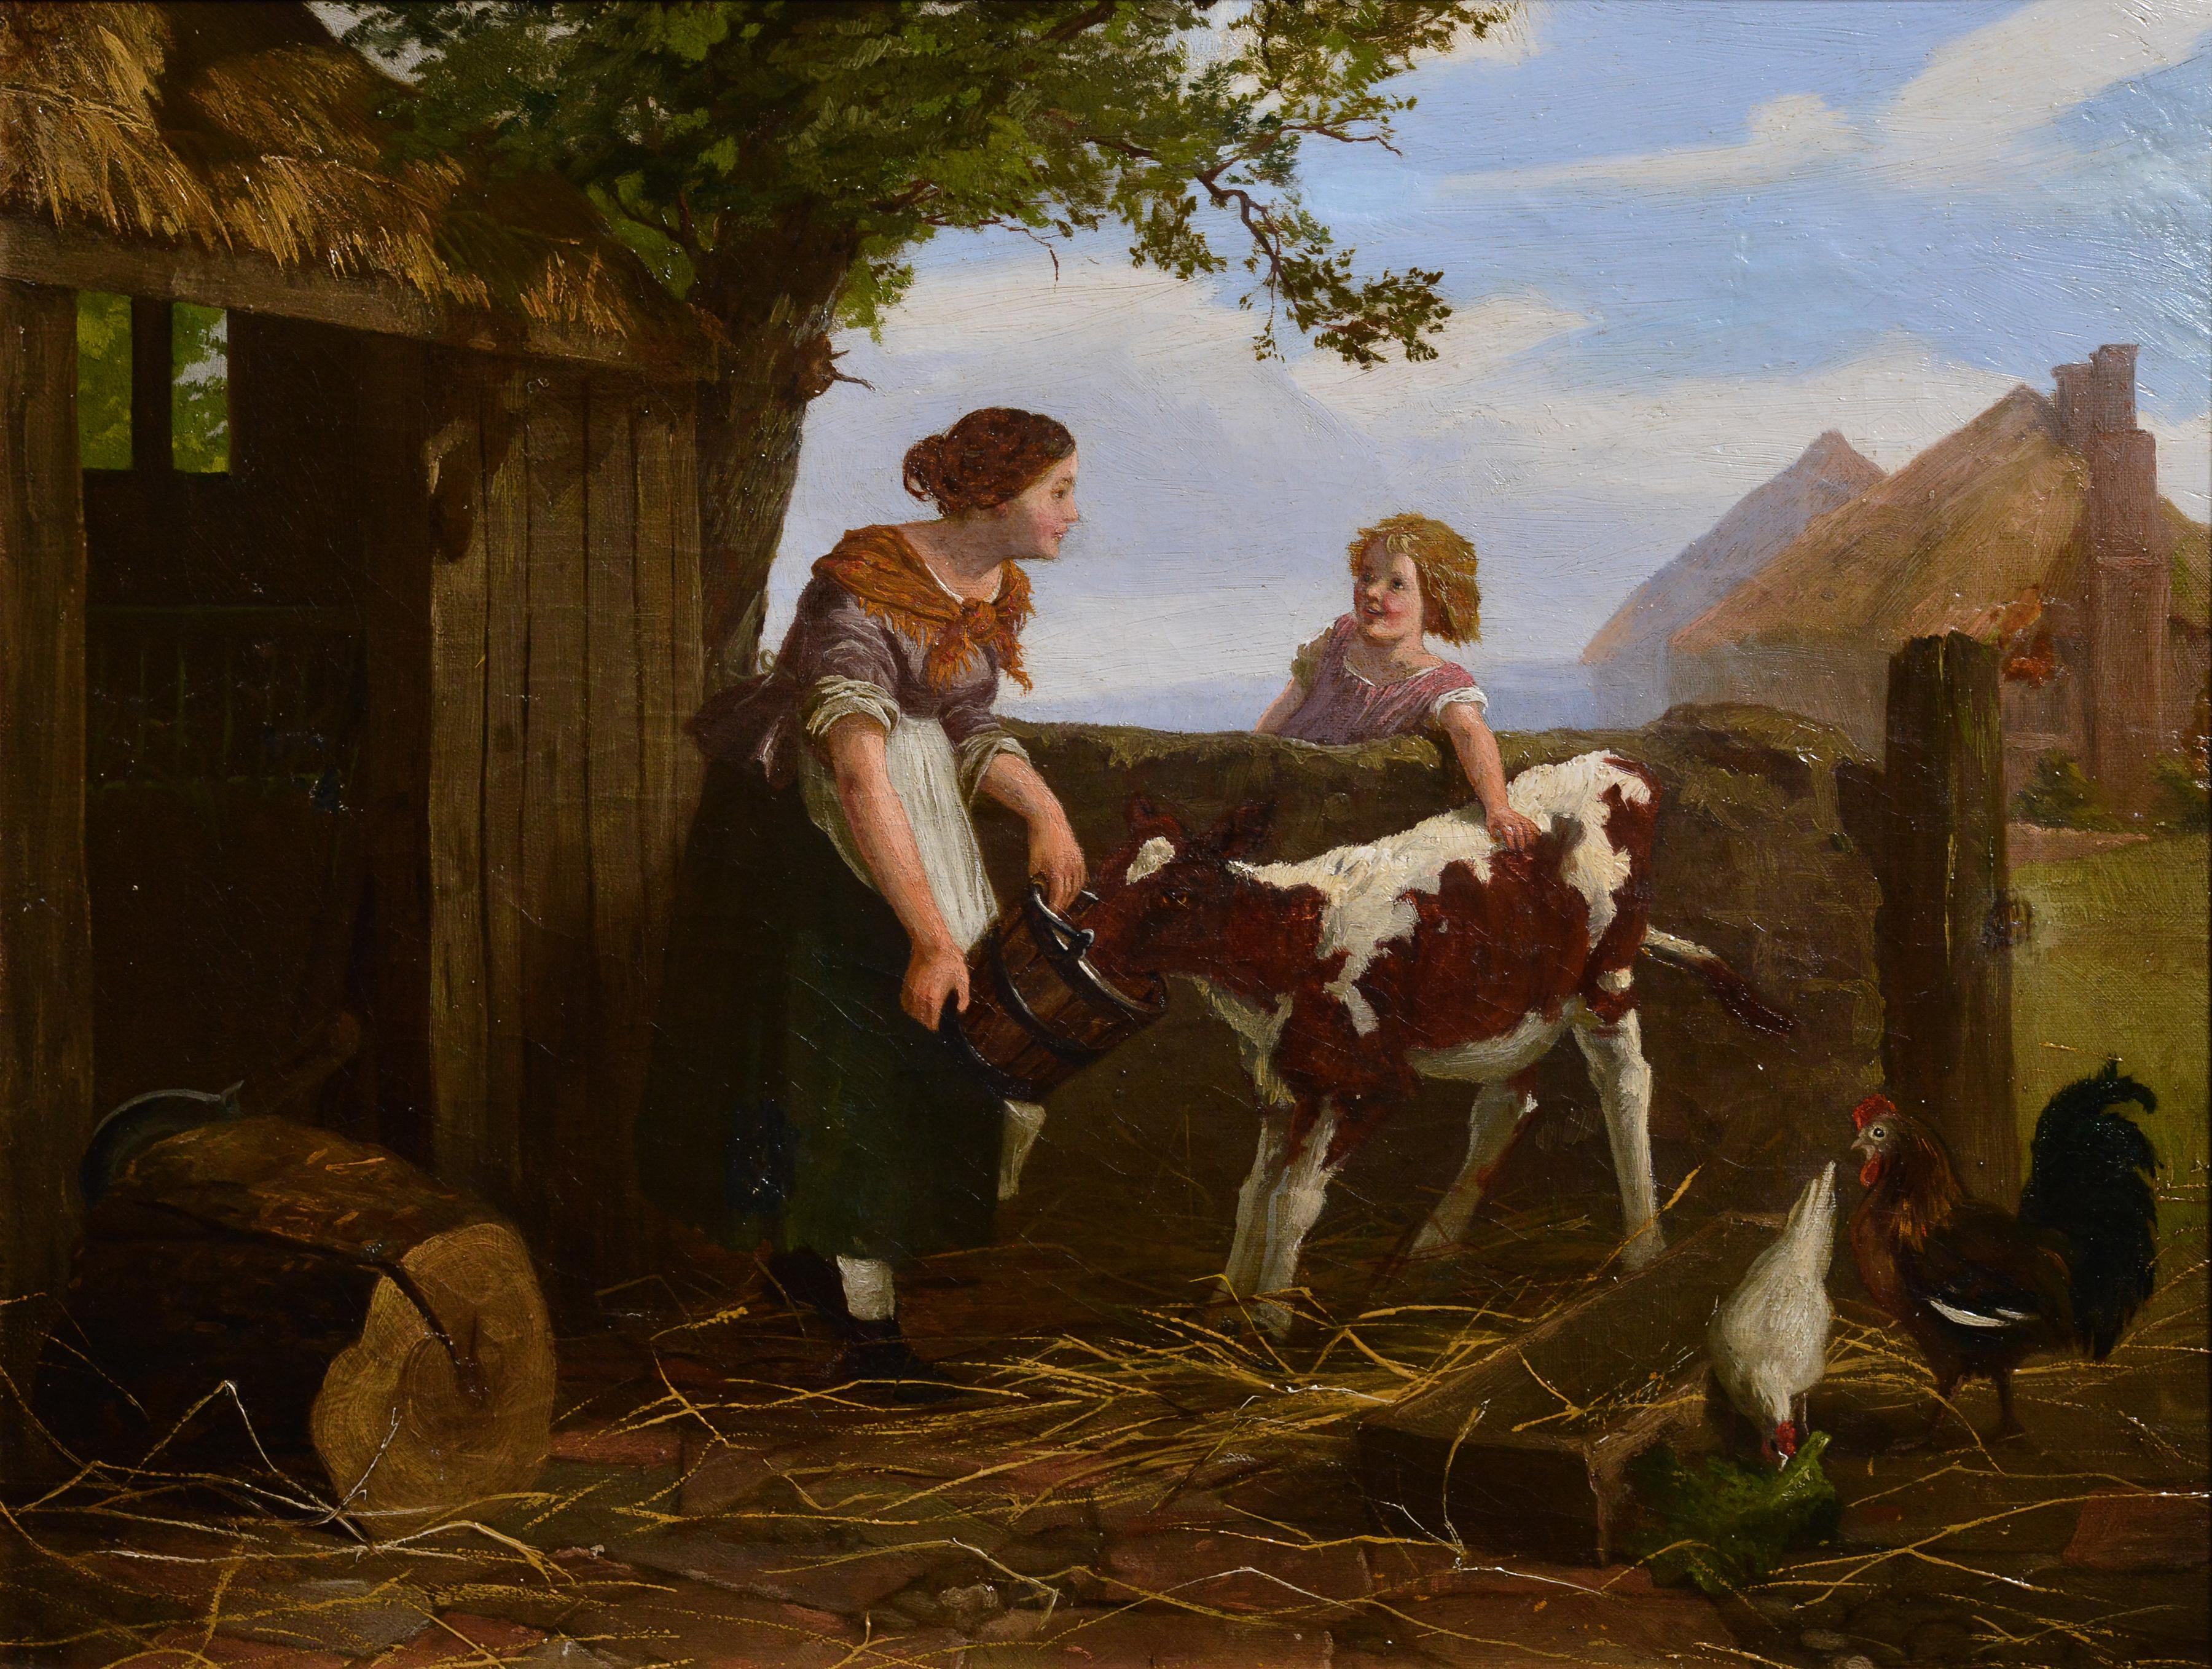 As we gaze upon this artwork, we are immediately struck by the warmth and tenderness exuding from the scene. The woman, with a gentle smile on her face, carefully feeds the pet calf, while the redhead girl, her eyes sparkling with excitement,